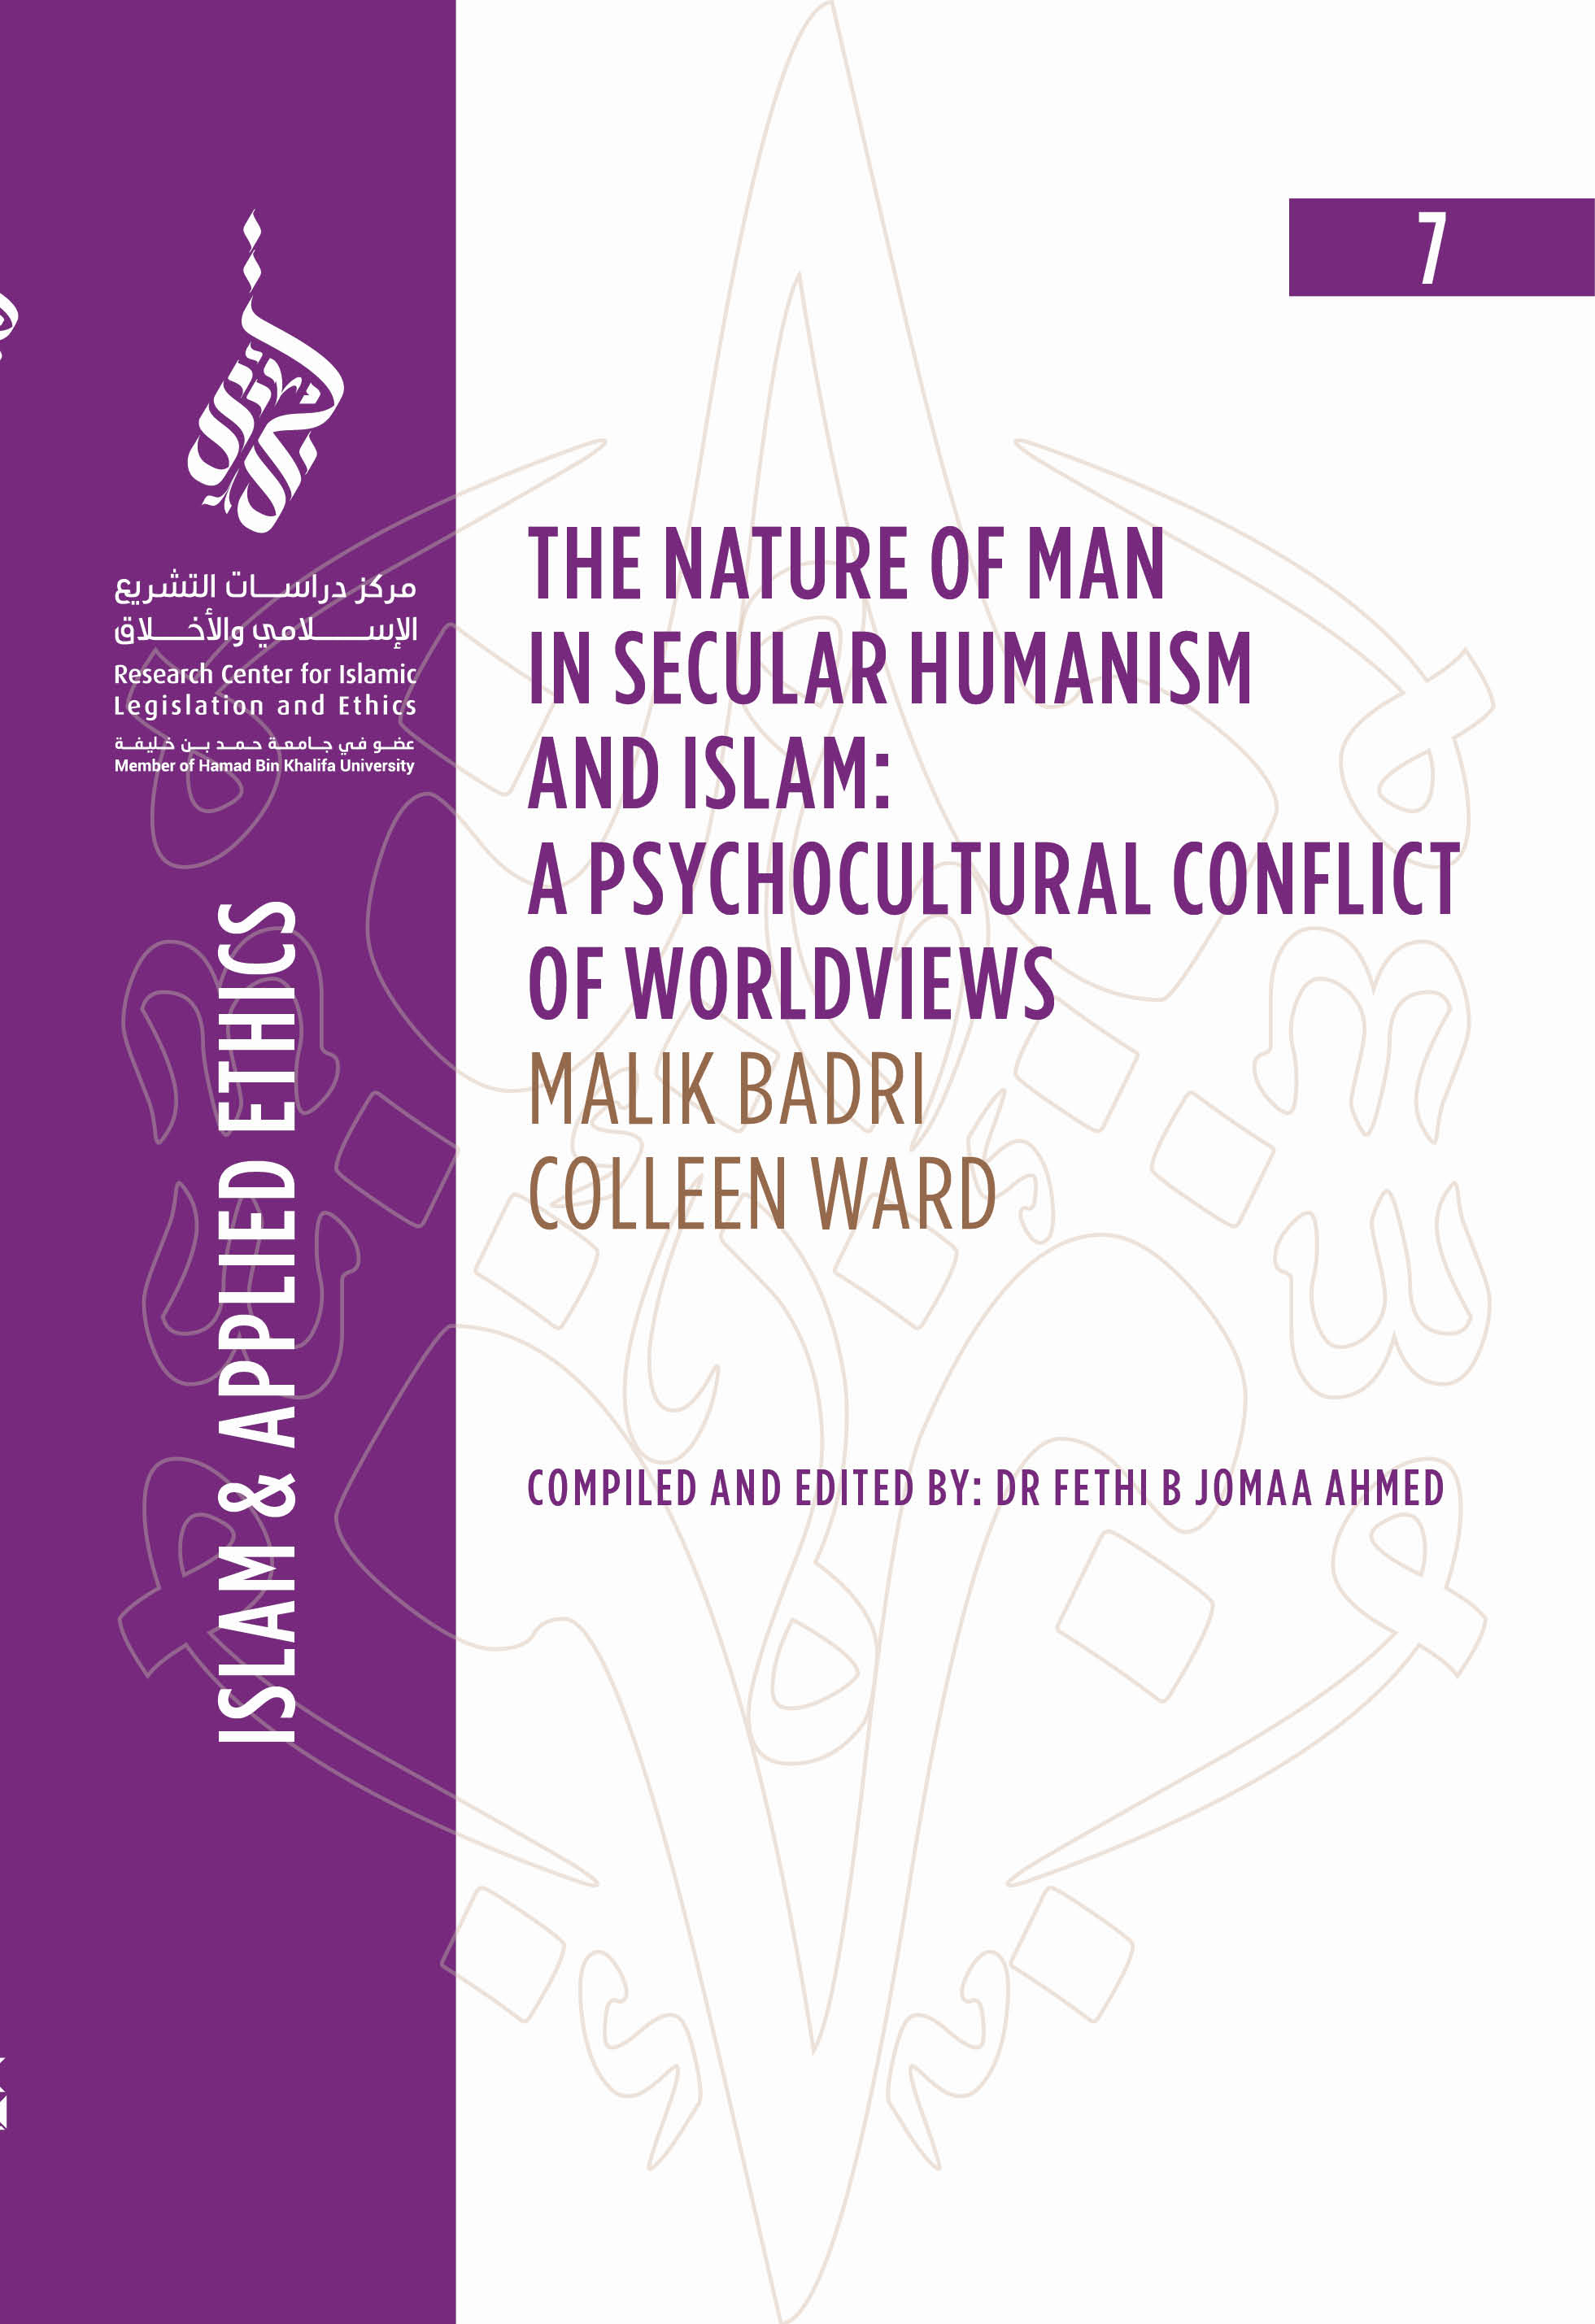 The Nature of Man in Secular Humanism and Islam: A Psychocultural Conflict of Worldviews